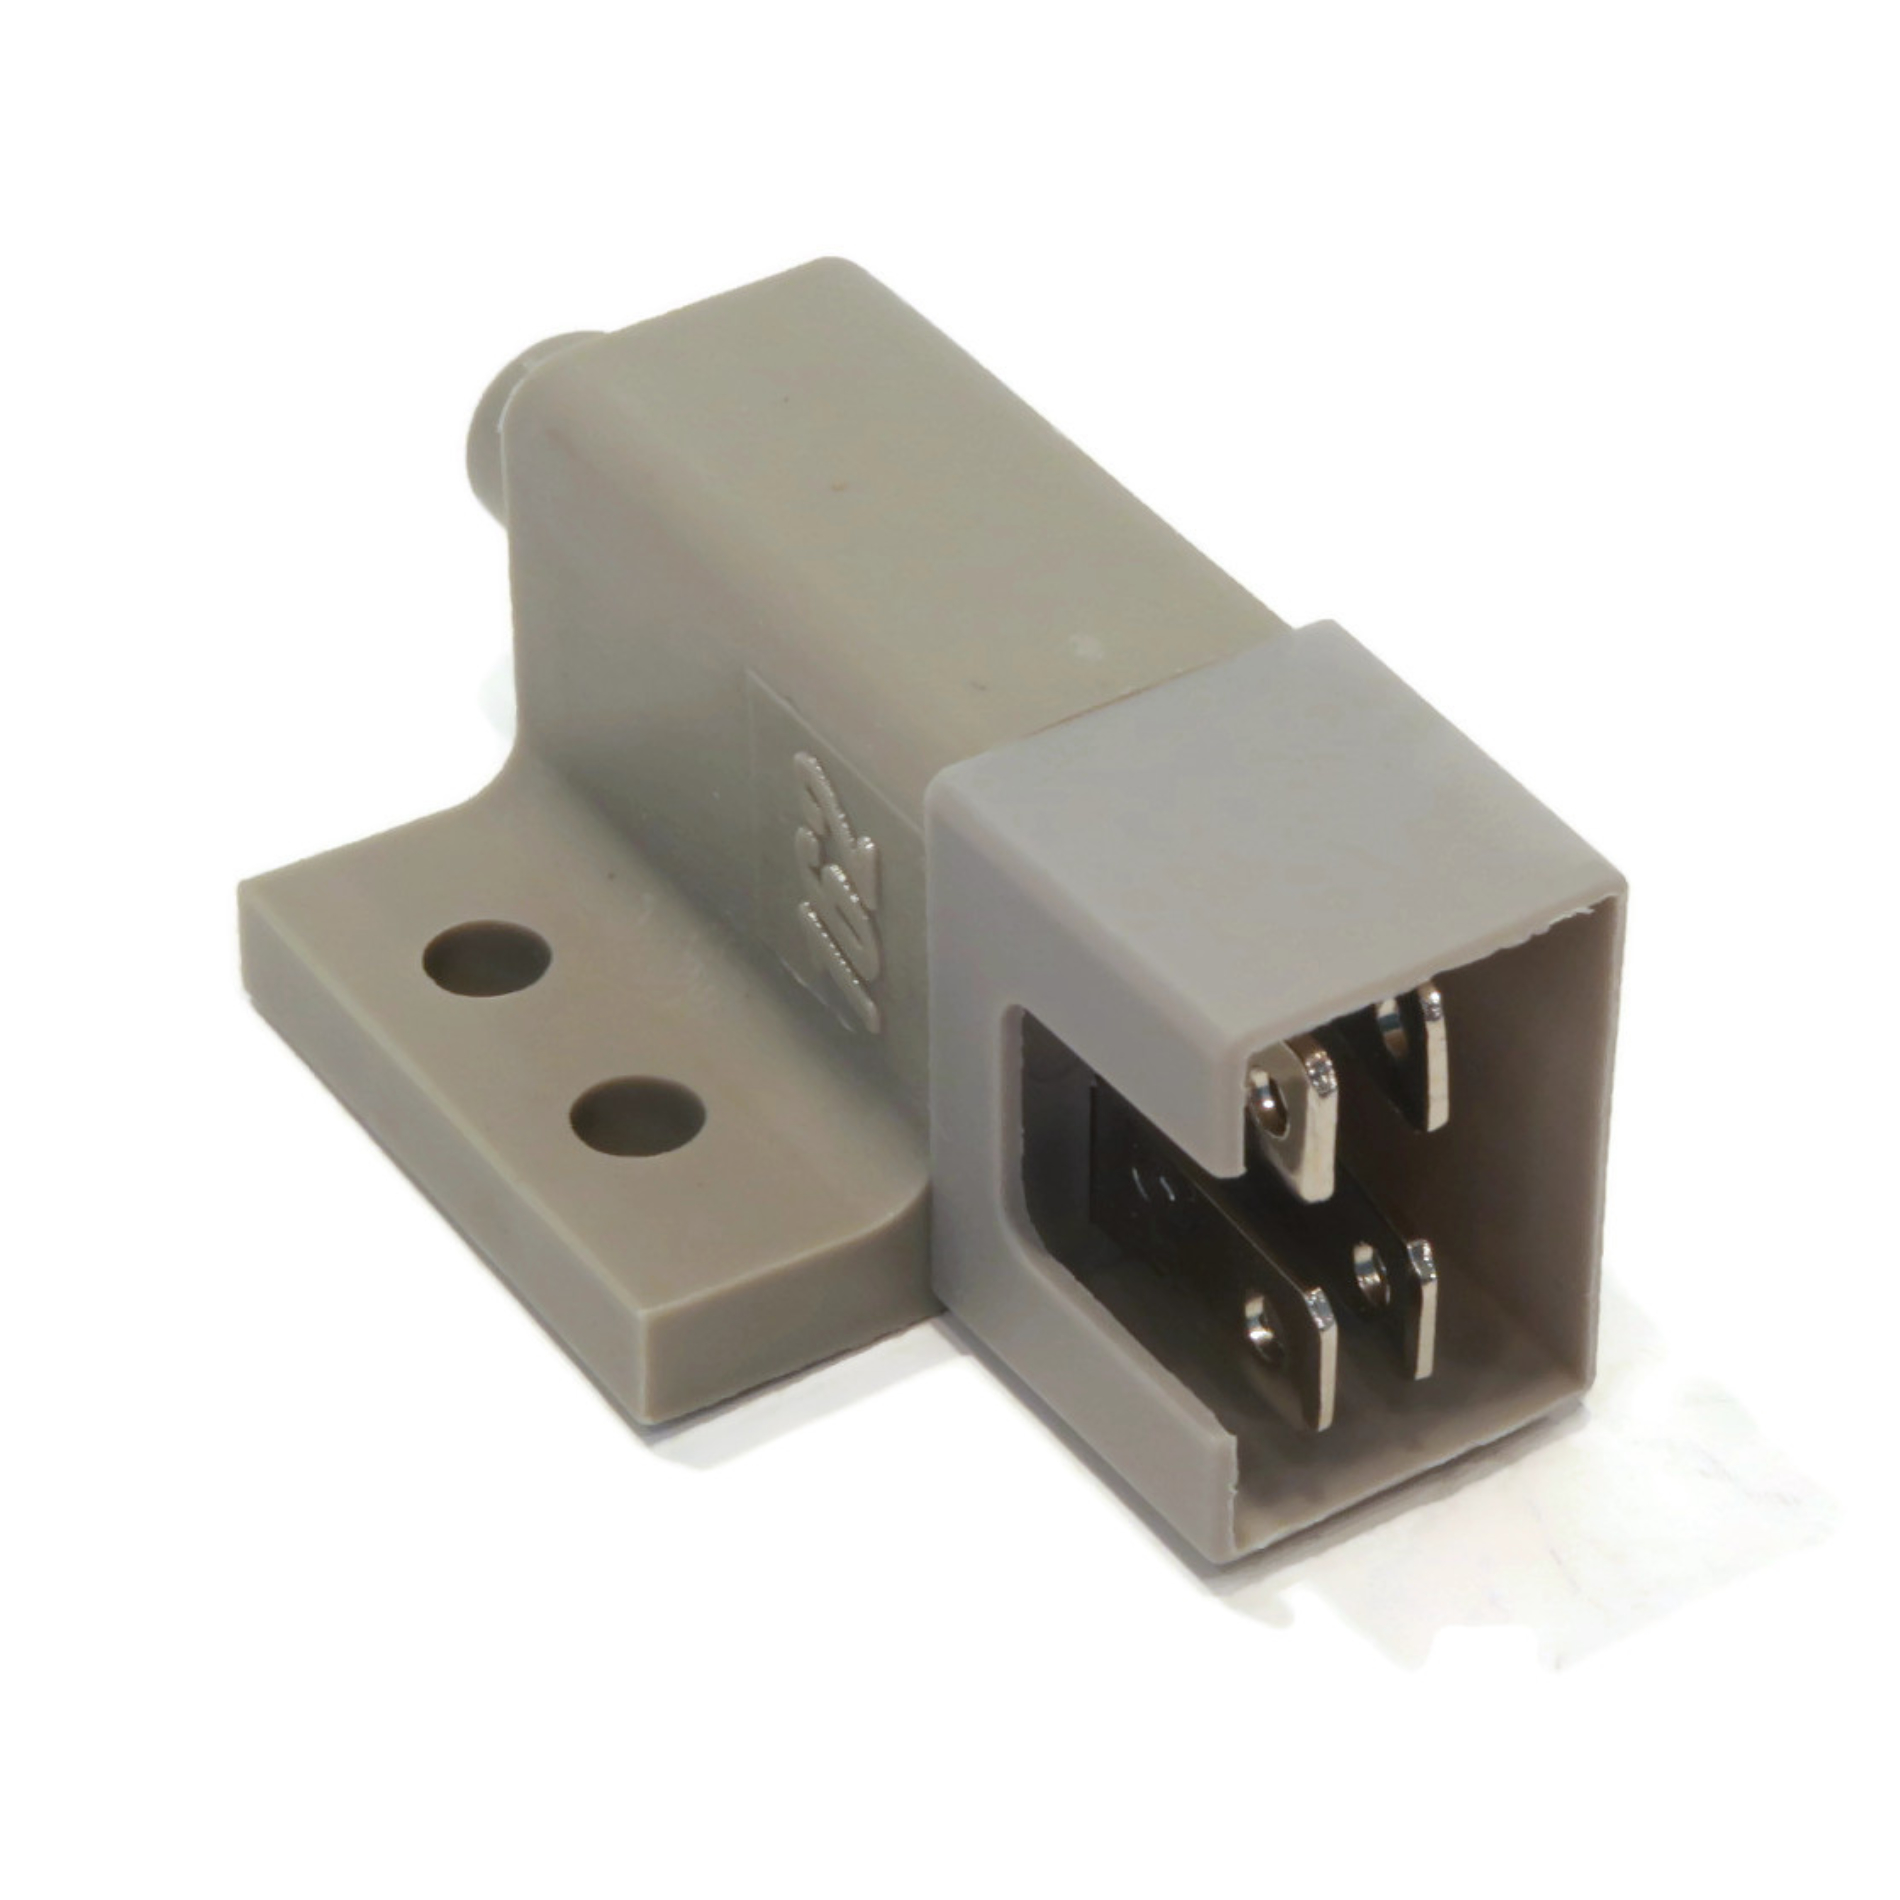 The ROP Shop | (2) Interlock Switch For Delta 6400-53 Chopper 500019 ExMark 1-633111, 633111 - image 1 of 7